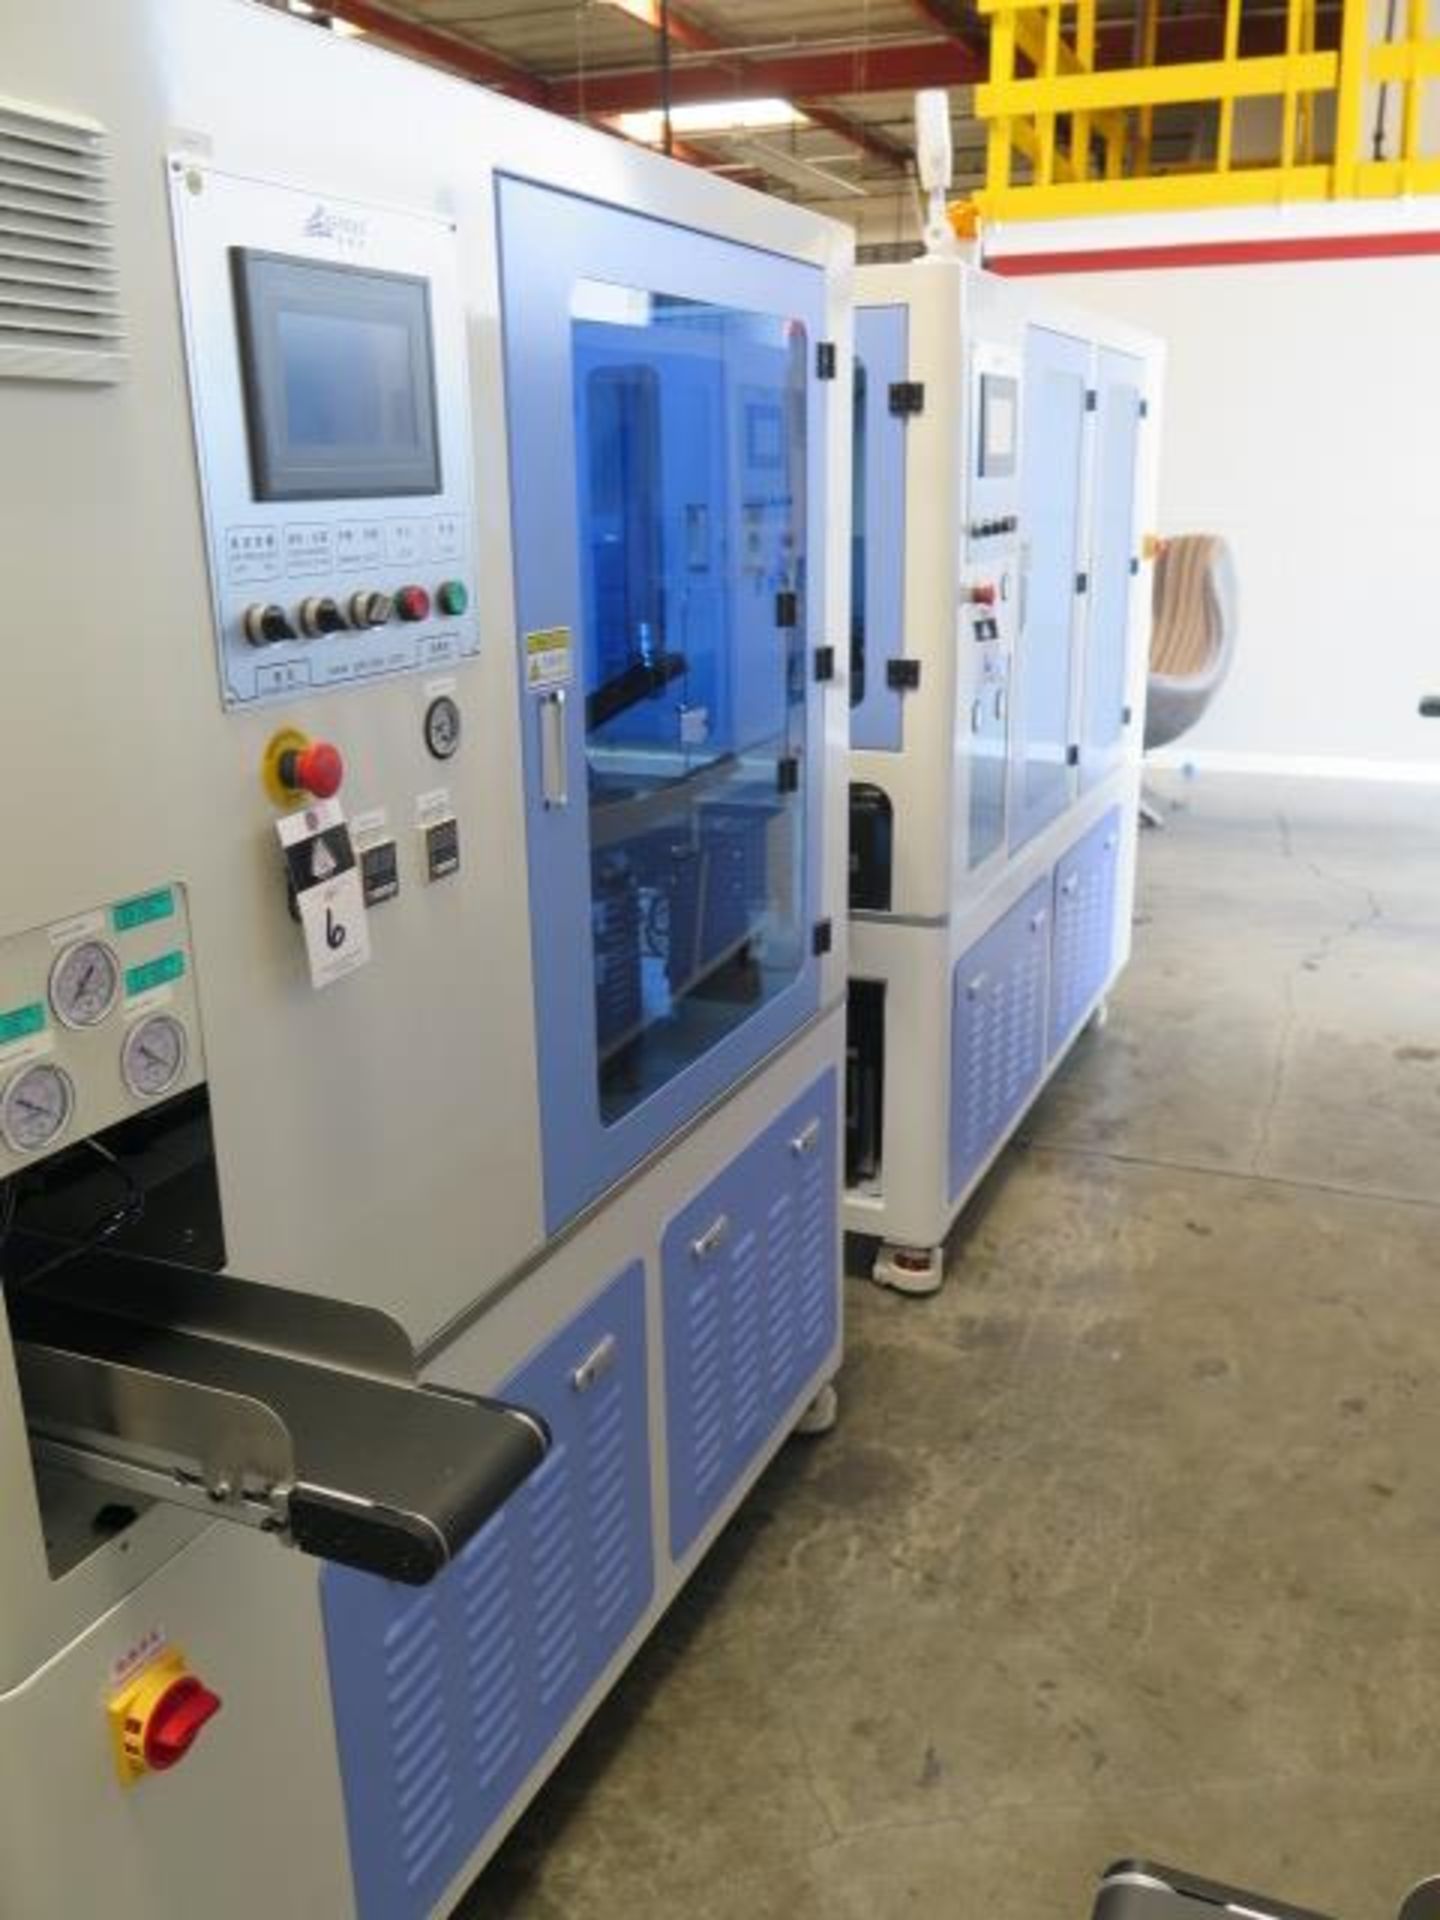 2/2021 Gereke mdl. GRK-TWO1 Cassette Assembly and Packaging Line s/n GRK20210227040, SOLD AS IS